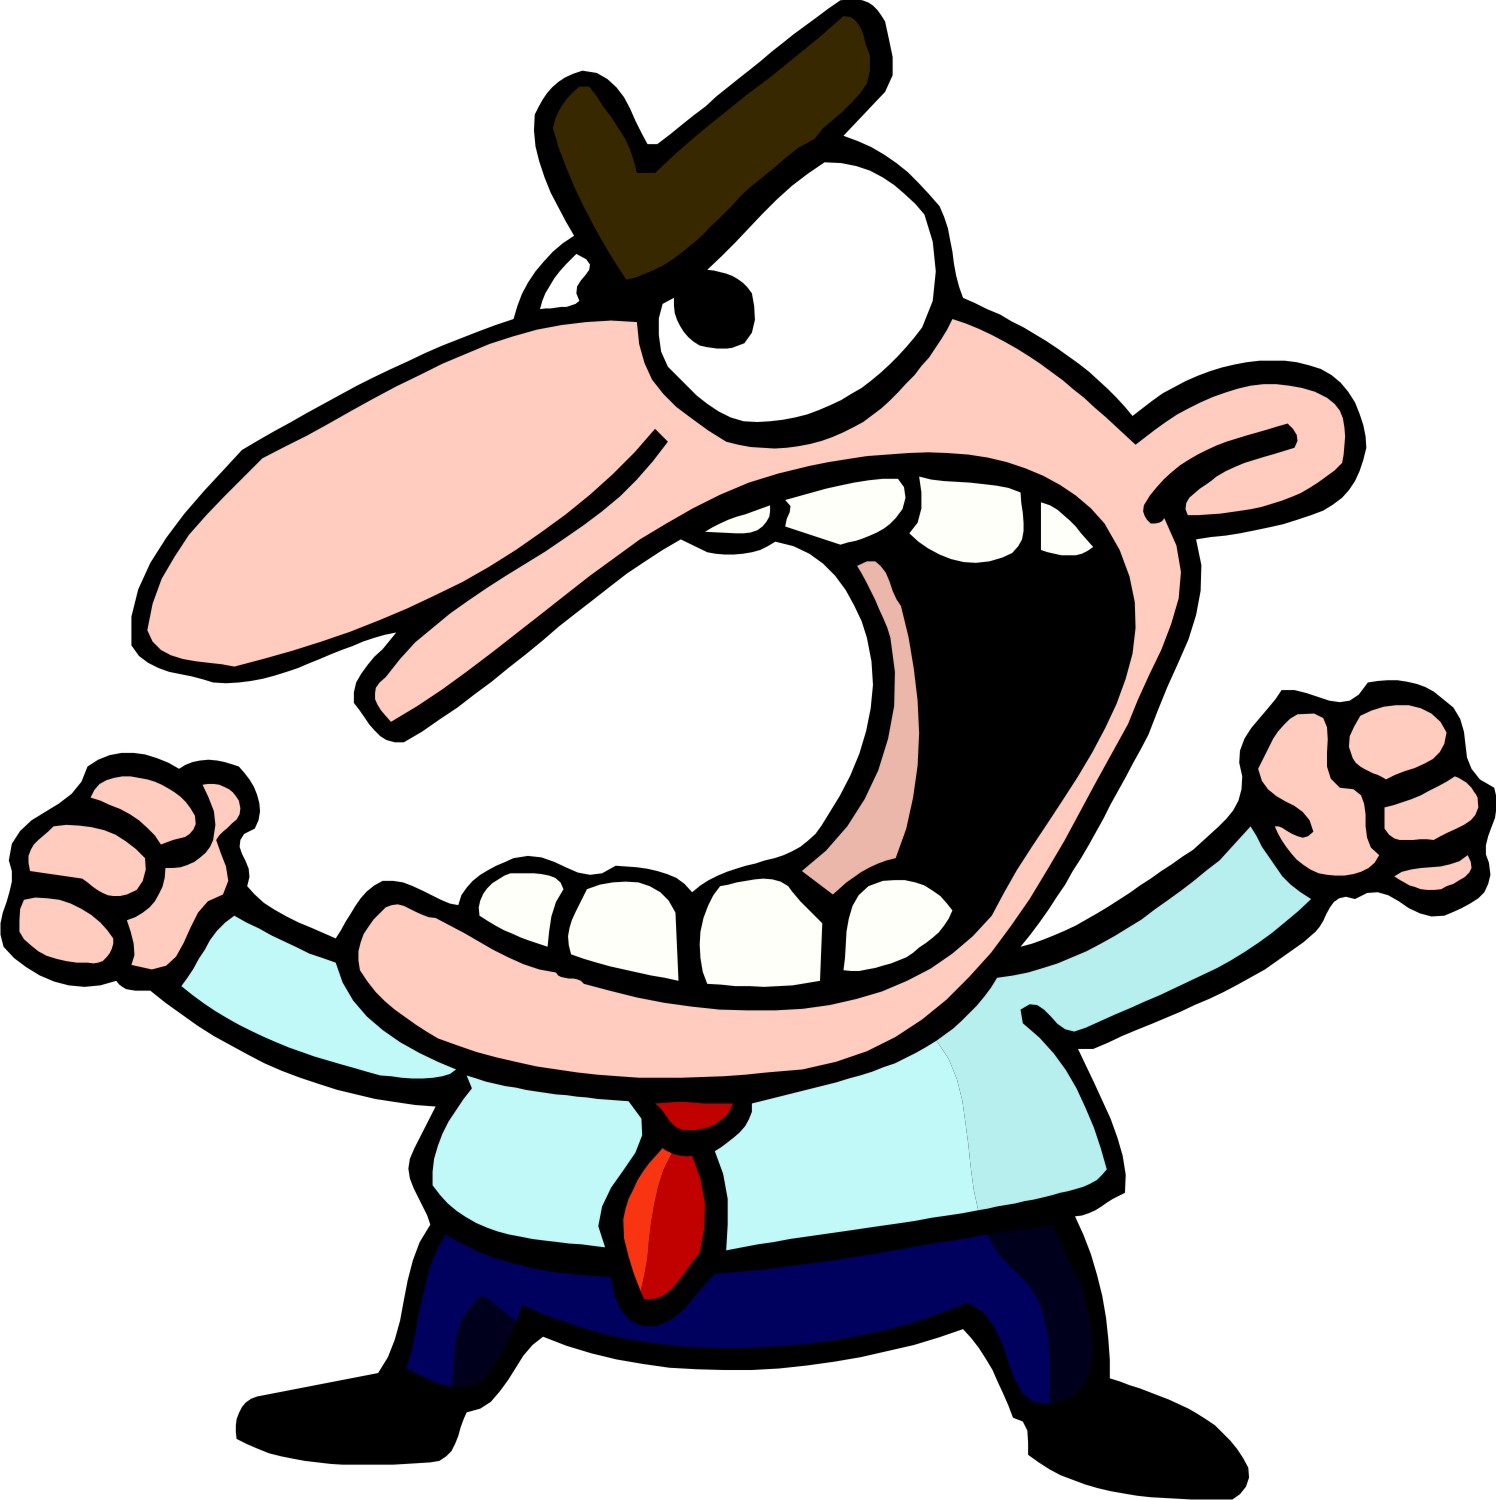 Anger clipart #8, Download drawings